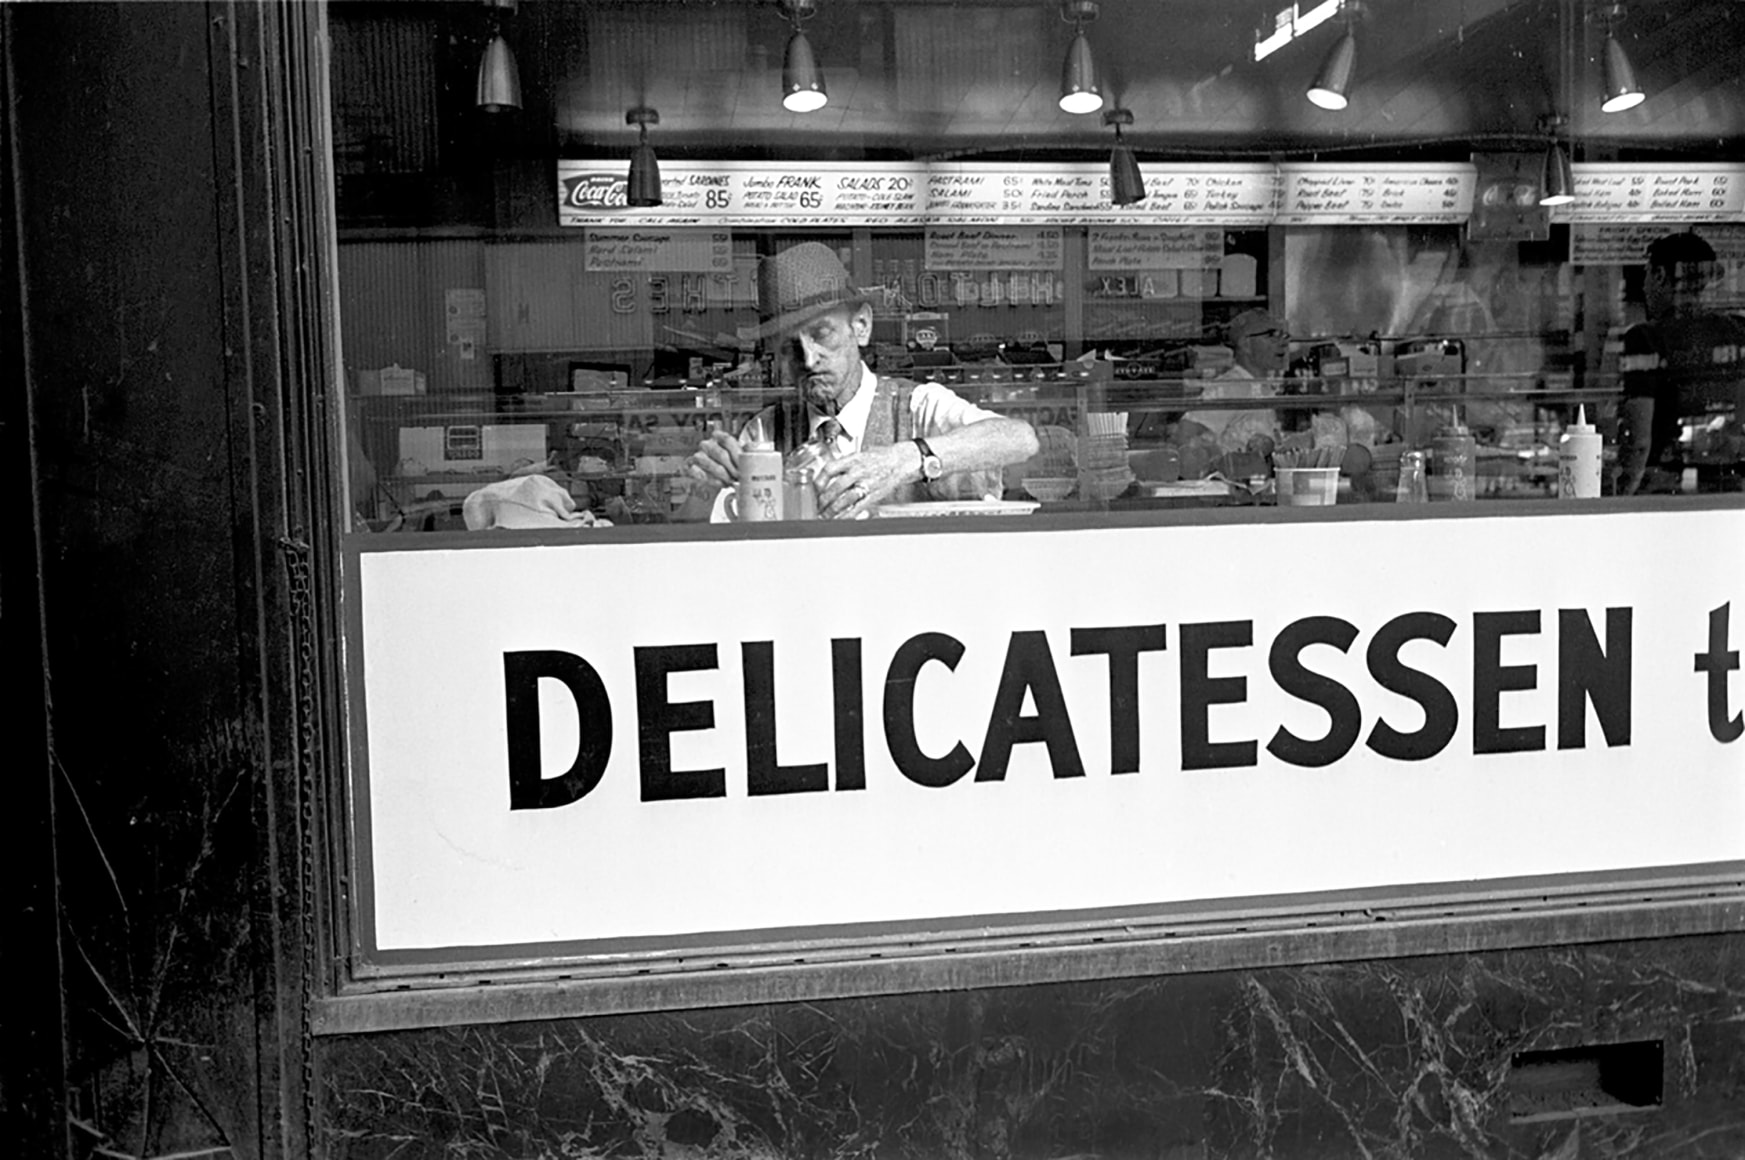 11. Simpson Kalisher, Untitled, ​c. 1960. Man seated at deli counter behind window that reads &quot;Delicatessen&quot;